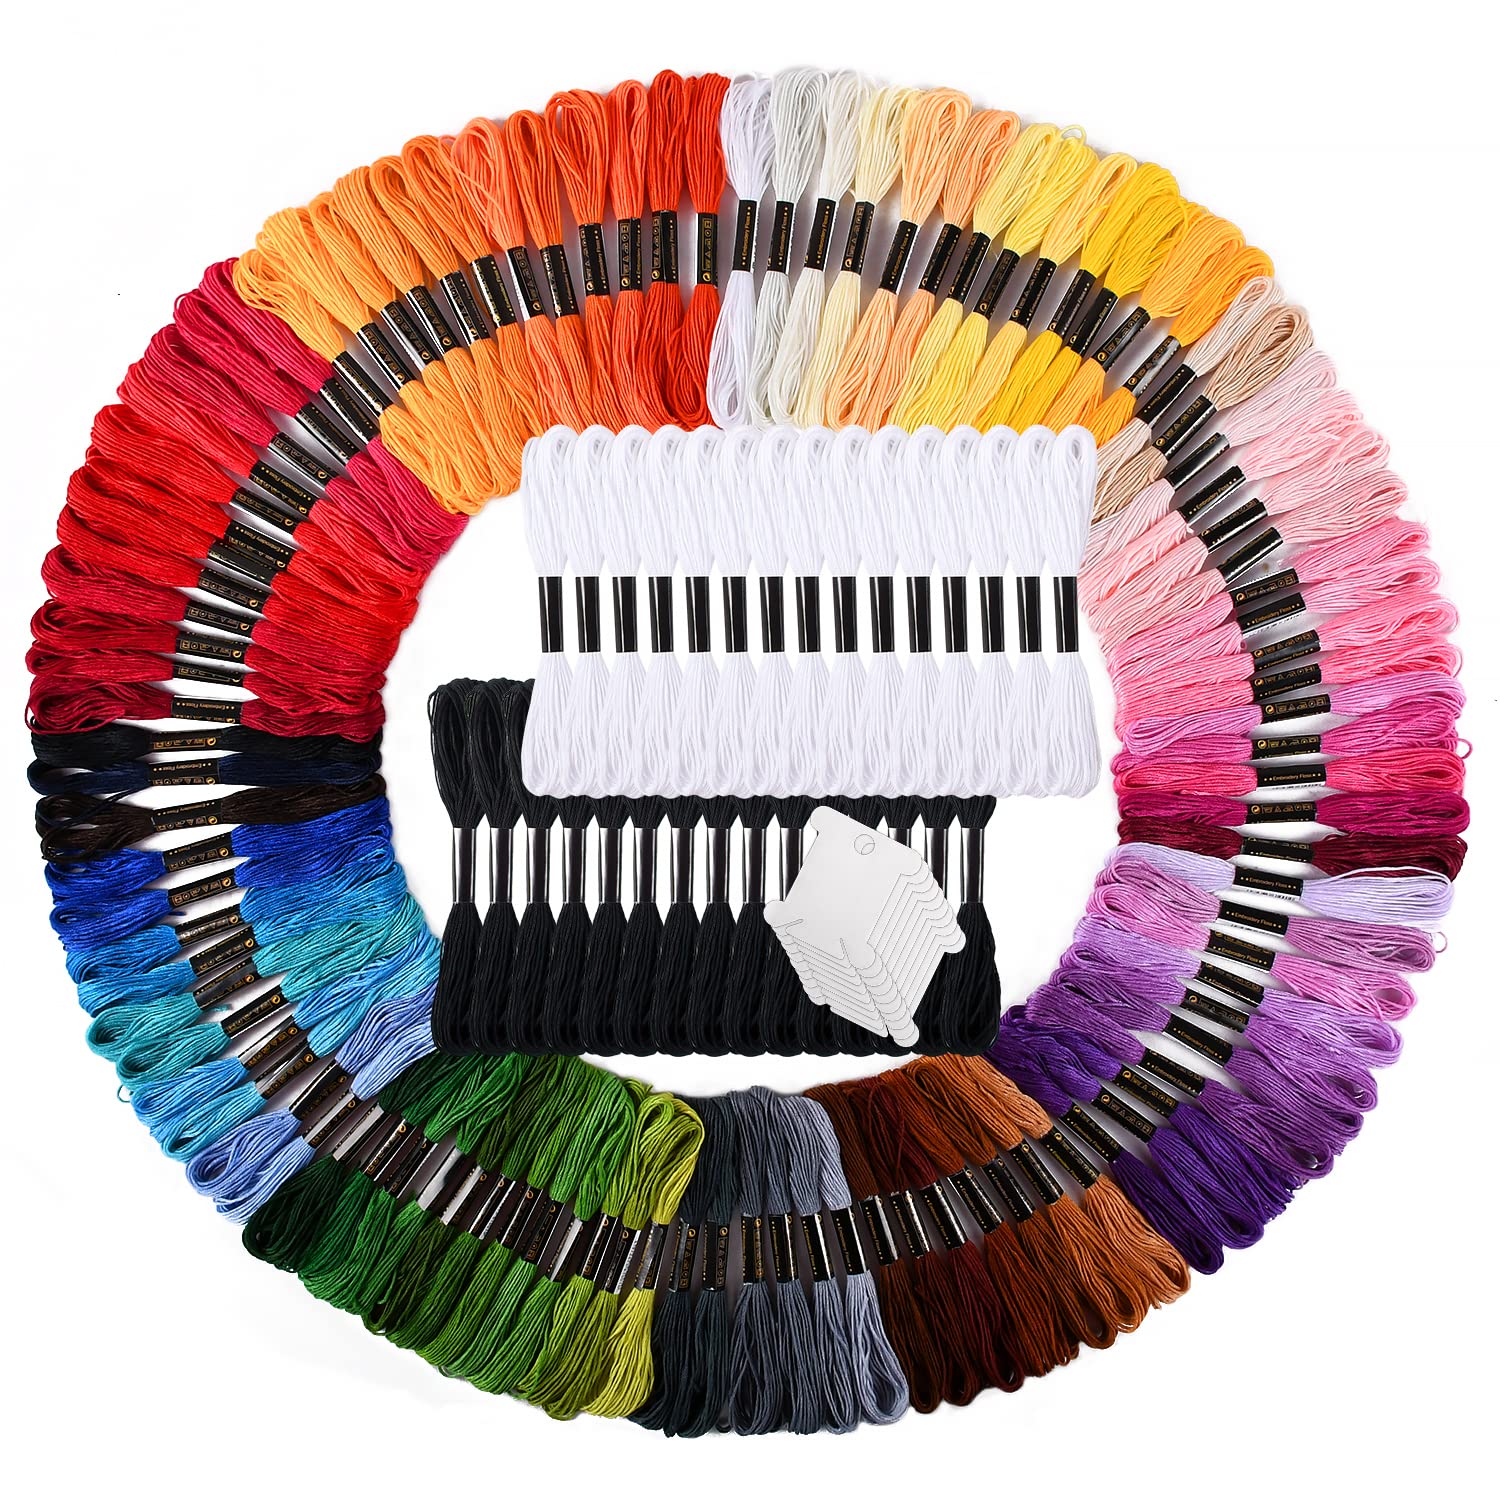 Friendship Bracelet String Kits 100 Colors Embroidery Floss and 15 Skeins  White & 15 Skeins Black Color 10 Pcs Plastic Floss Bobbins for Cross Stitch  Threads Bracelet Yarn Craft Floss